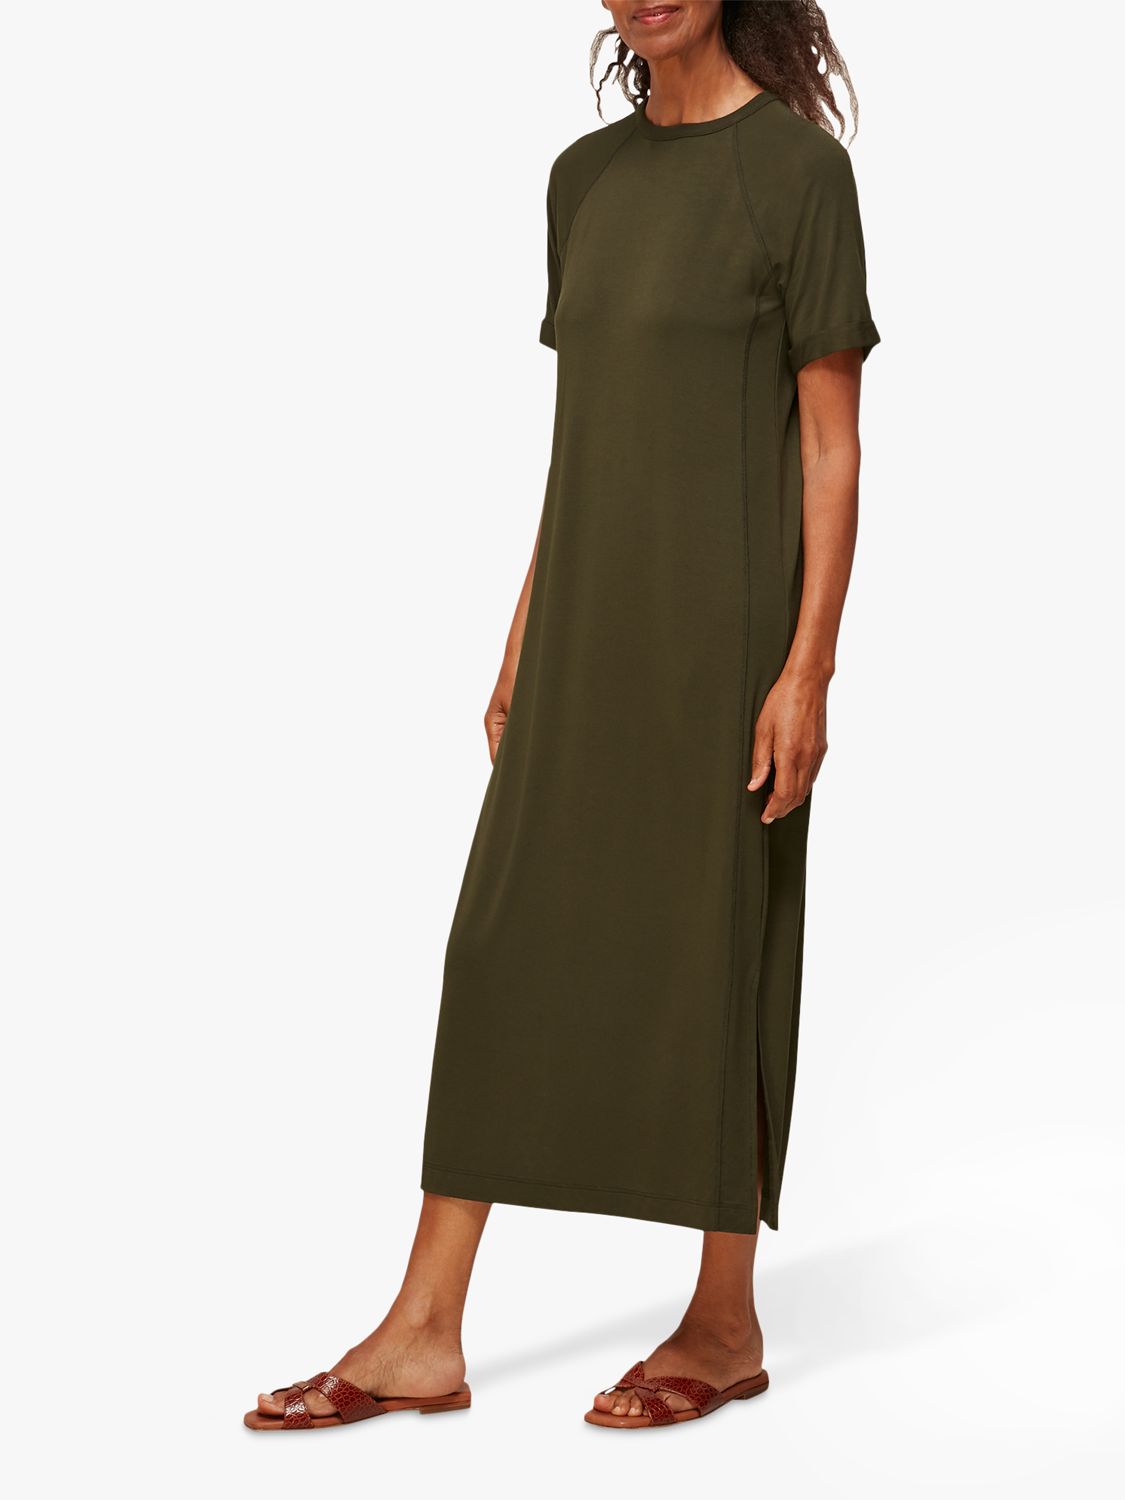 jersey maxi dress with sleeves